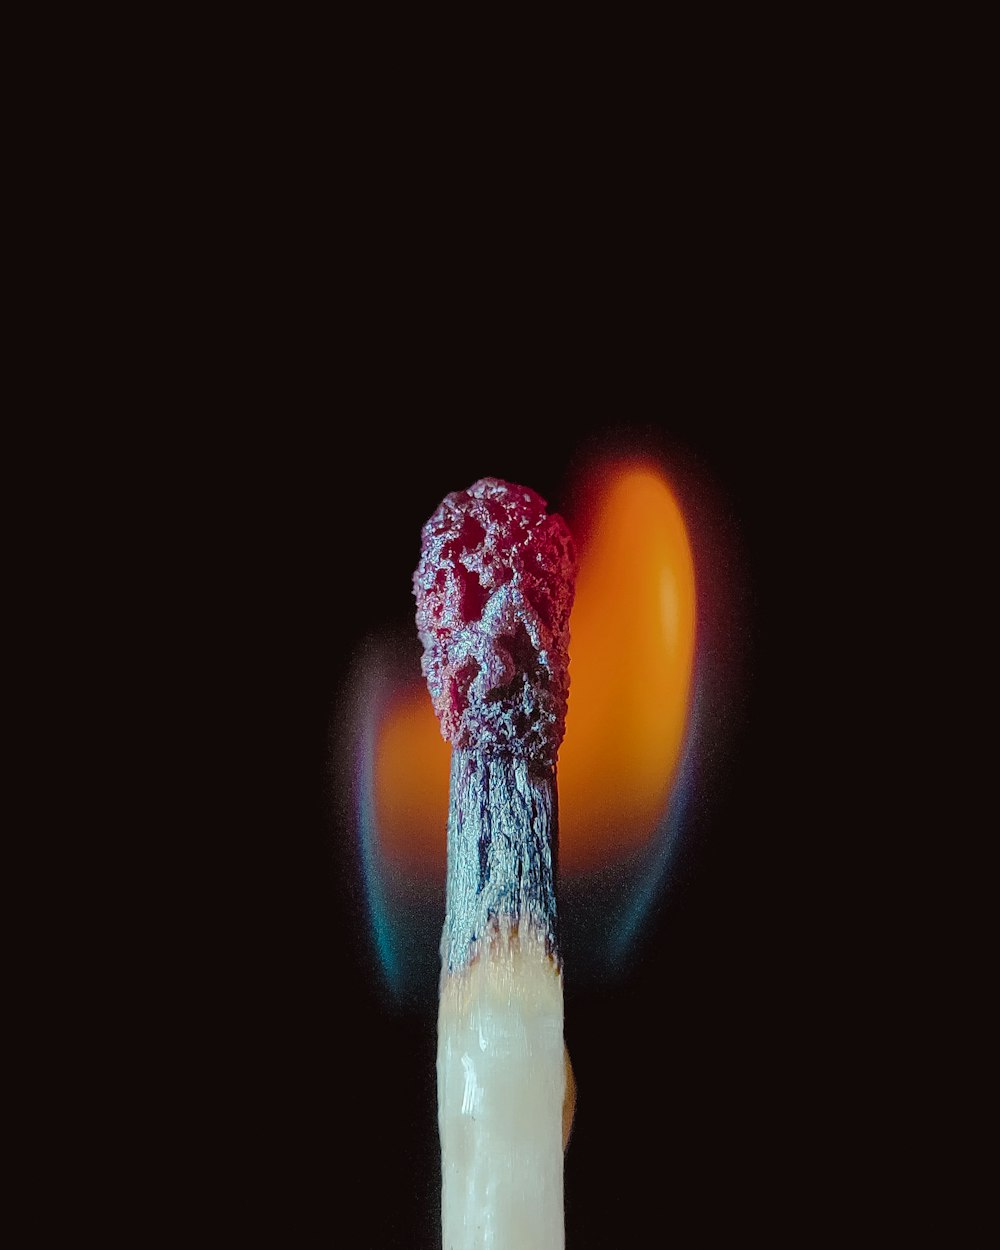 a lit cigarette with a red substance on top of it